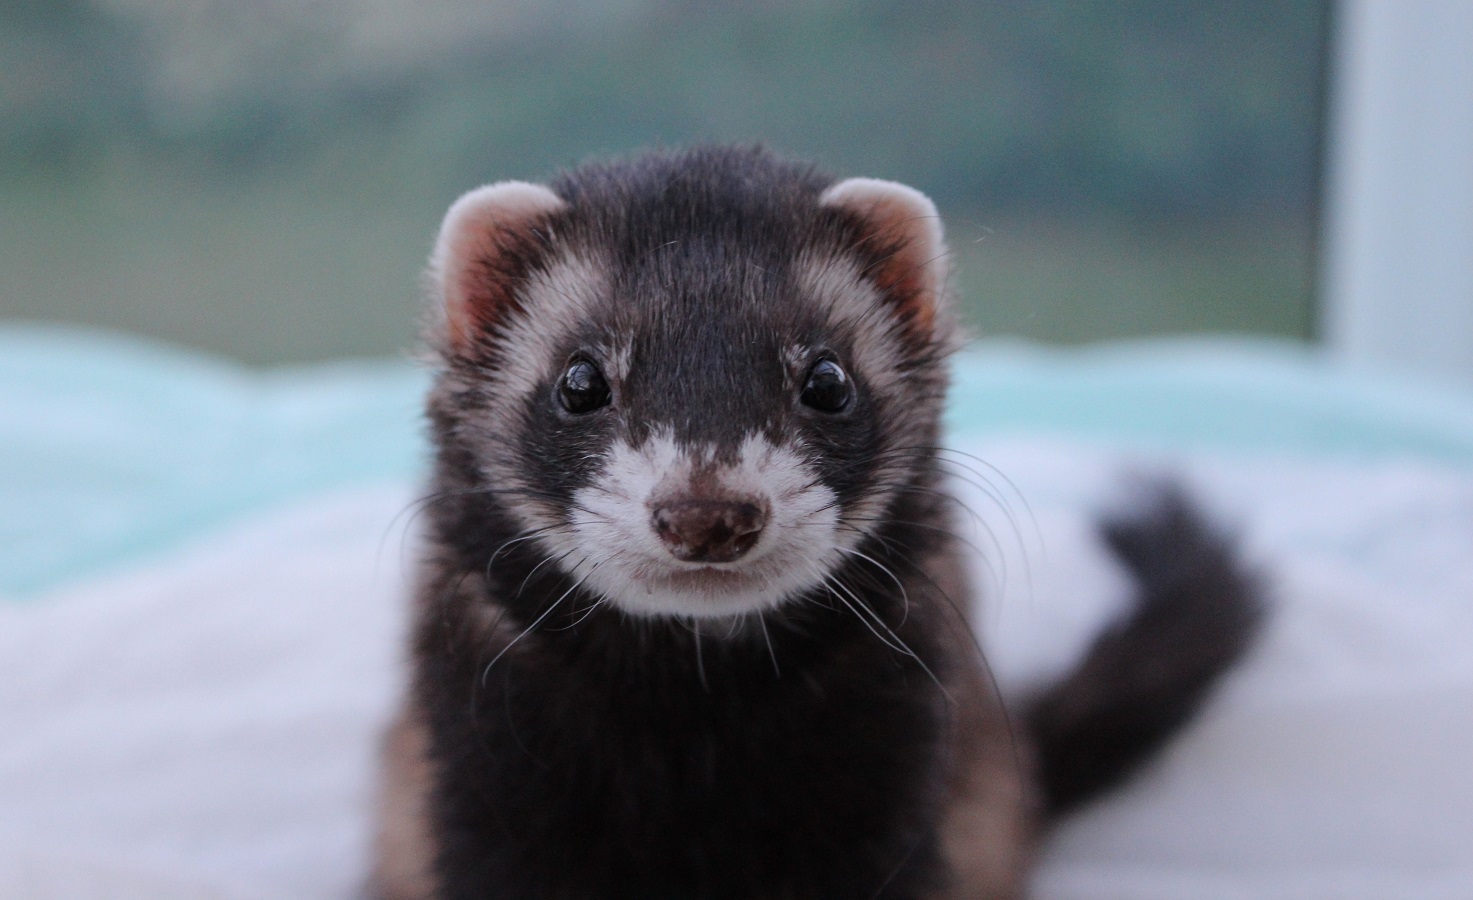 Ferret Pet - What Do Ferrets Eat and How to Take Care of Them